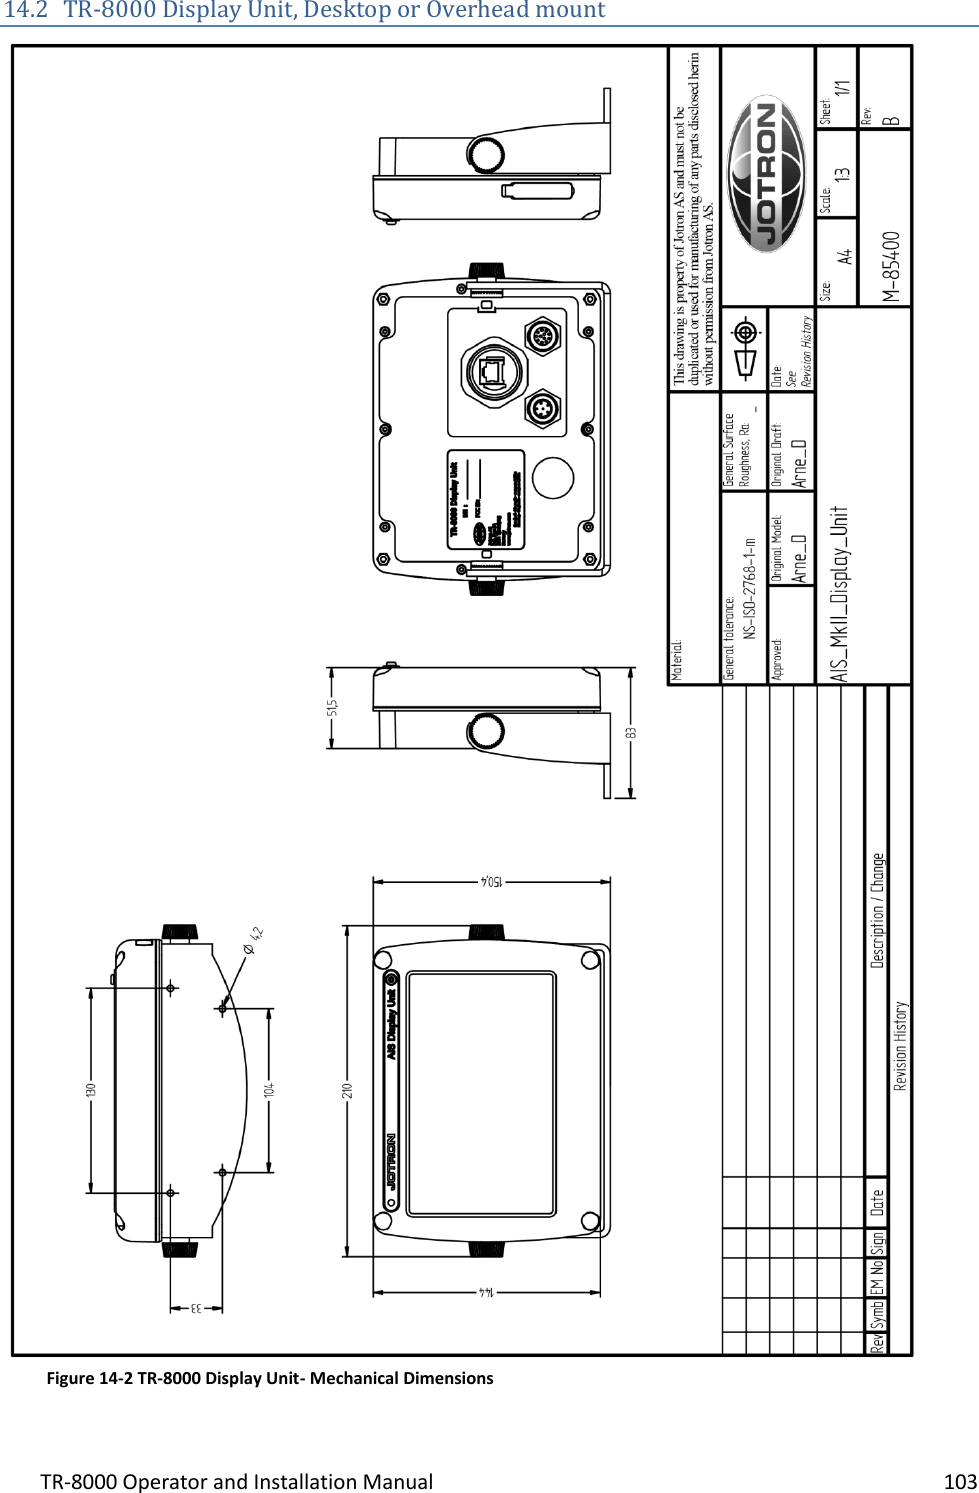 TR-8000 Operator and Installation Manual    103  14.2 TR-8000 Display Unit, Desktop or Overhead mount      Figure 14-2 TR-8000 Display Unit- Mechanical Dimensions 